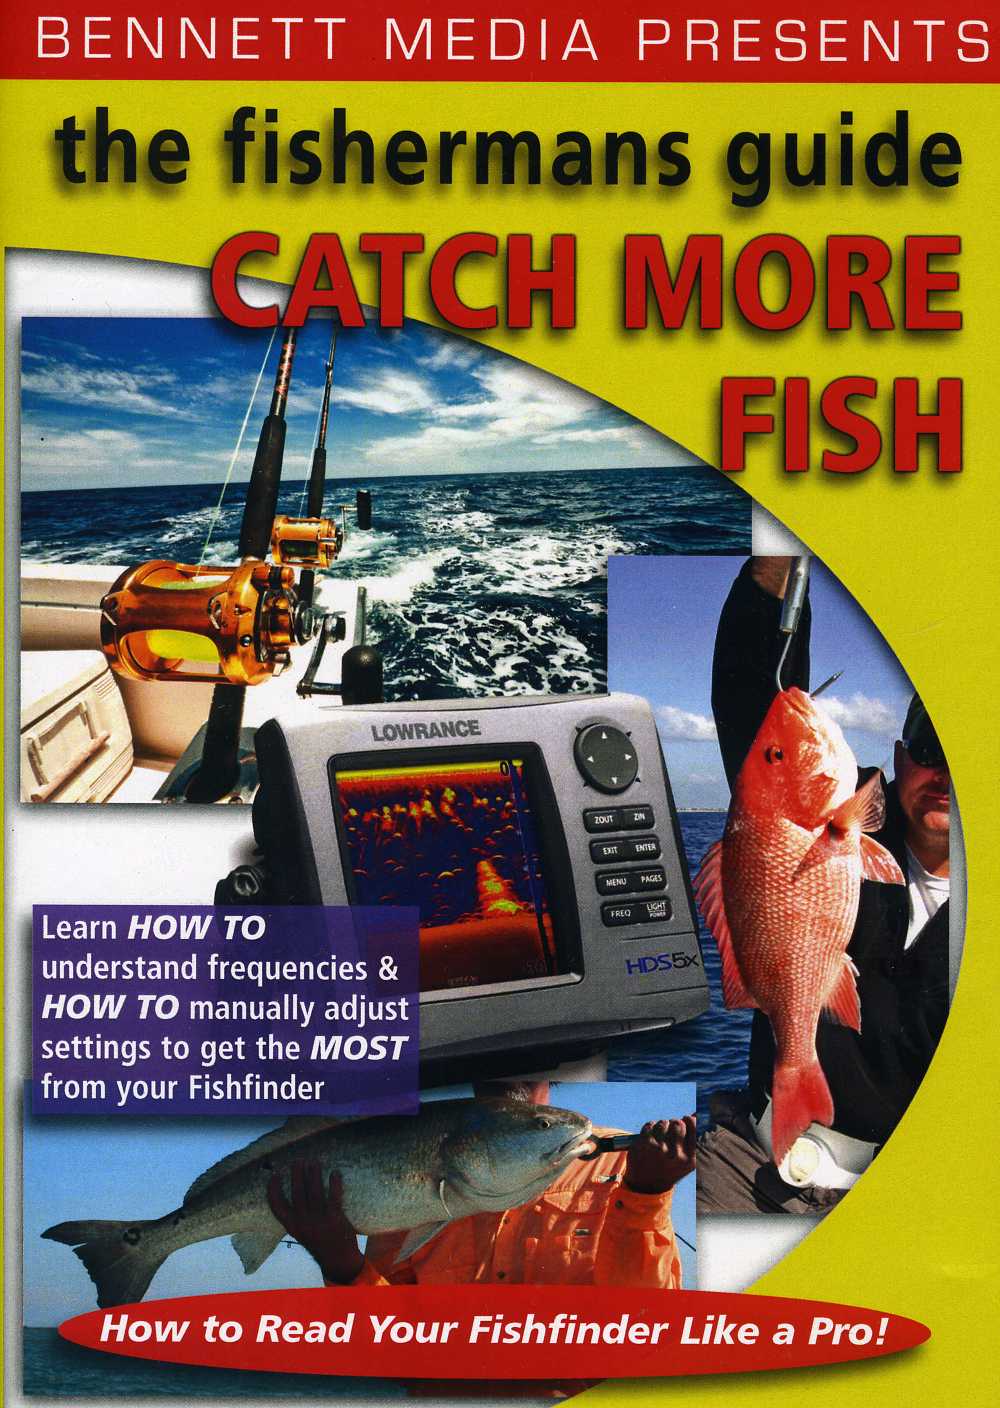 CATCH MORE FISH: HOW TO READ YOUR FISH FINDER LIKE